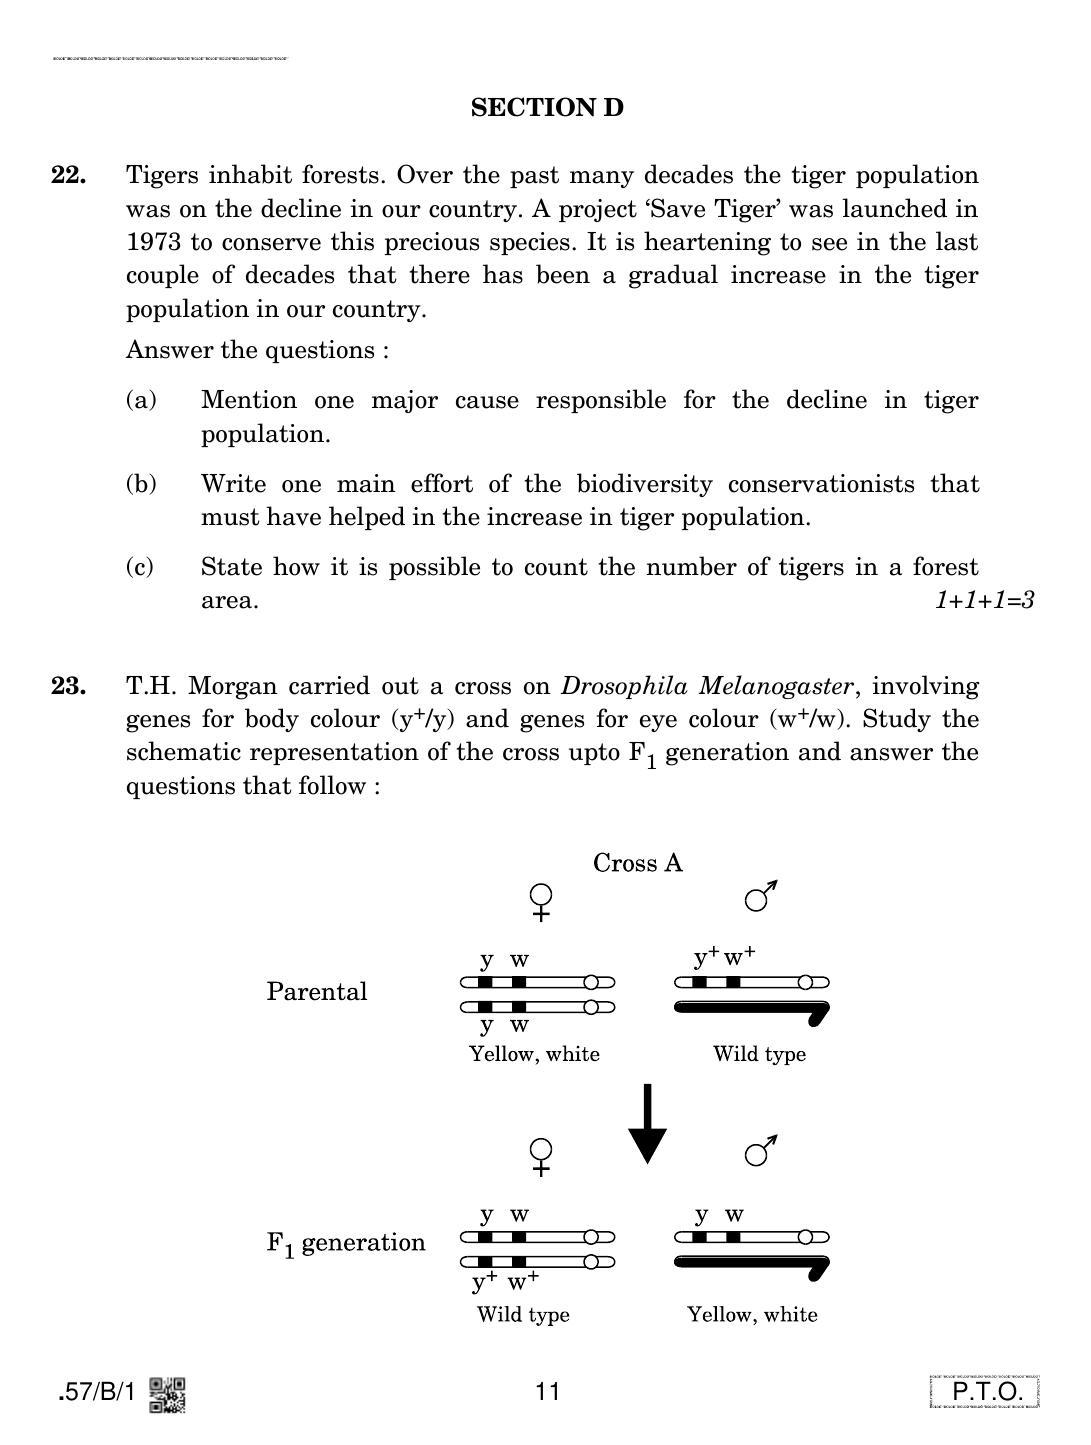 CBSE Class 12 57-C-1 - Biology 2020 Compartment Question Paper - Page 11